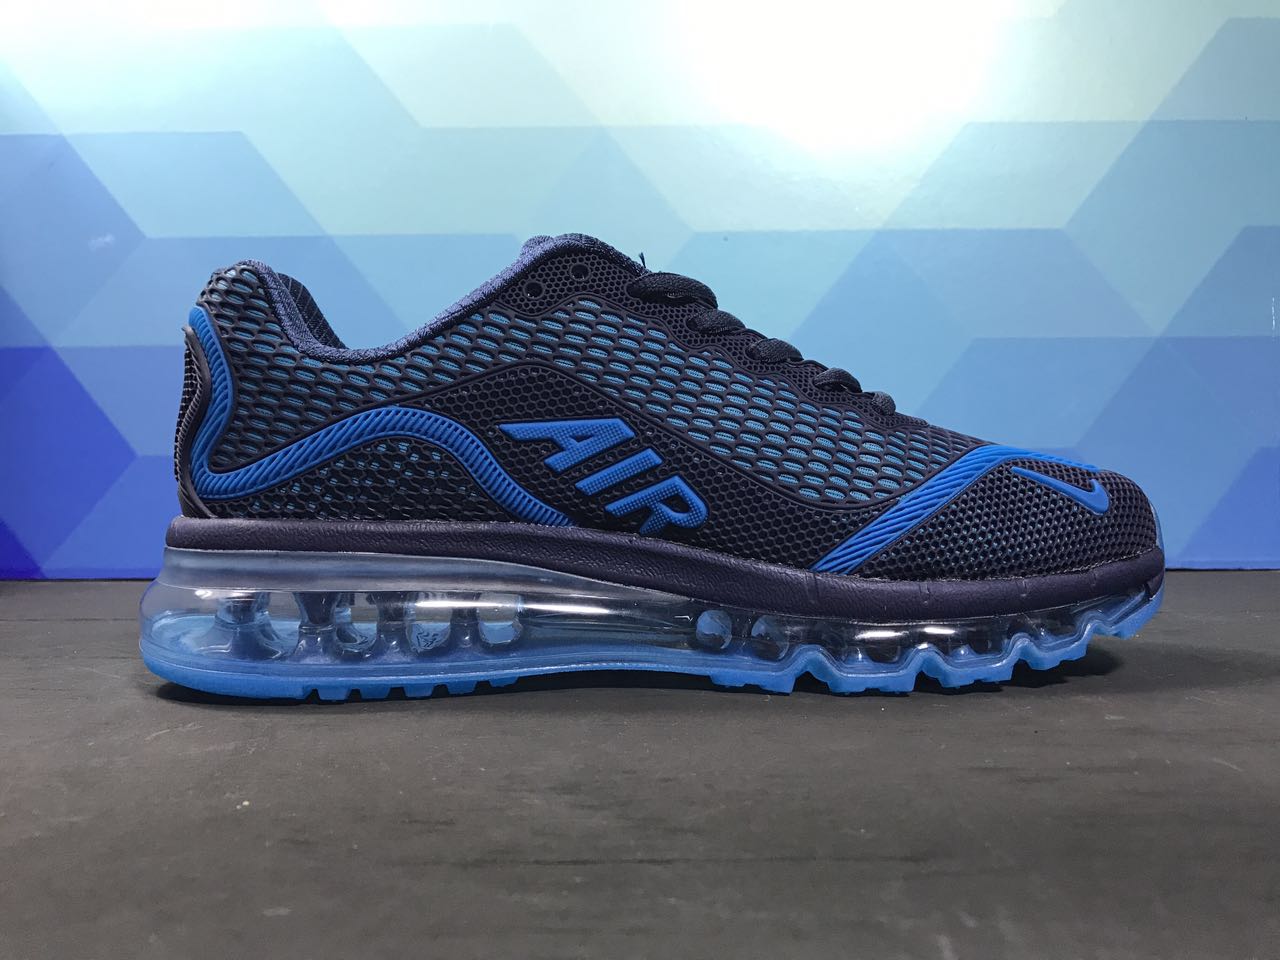 Nike Air Max 2017 III Black Blue Shoes - Click Image to Close